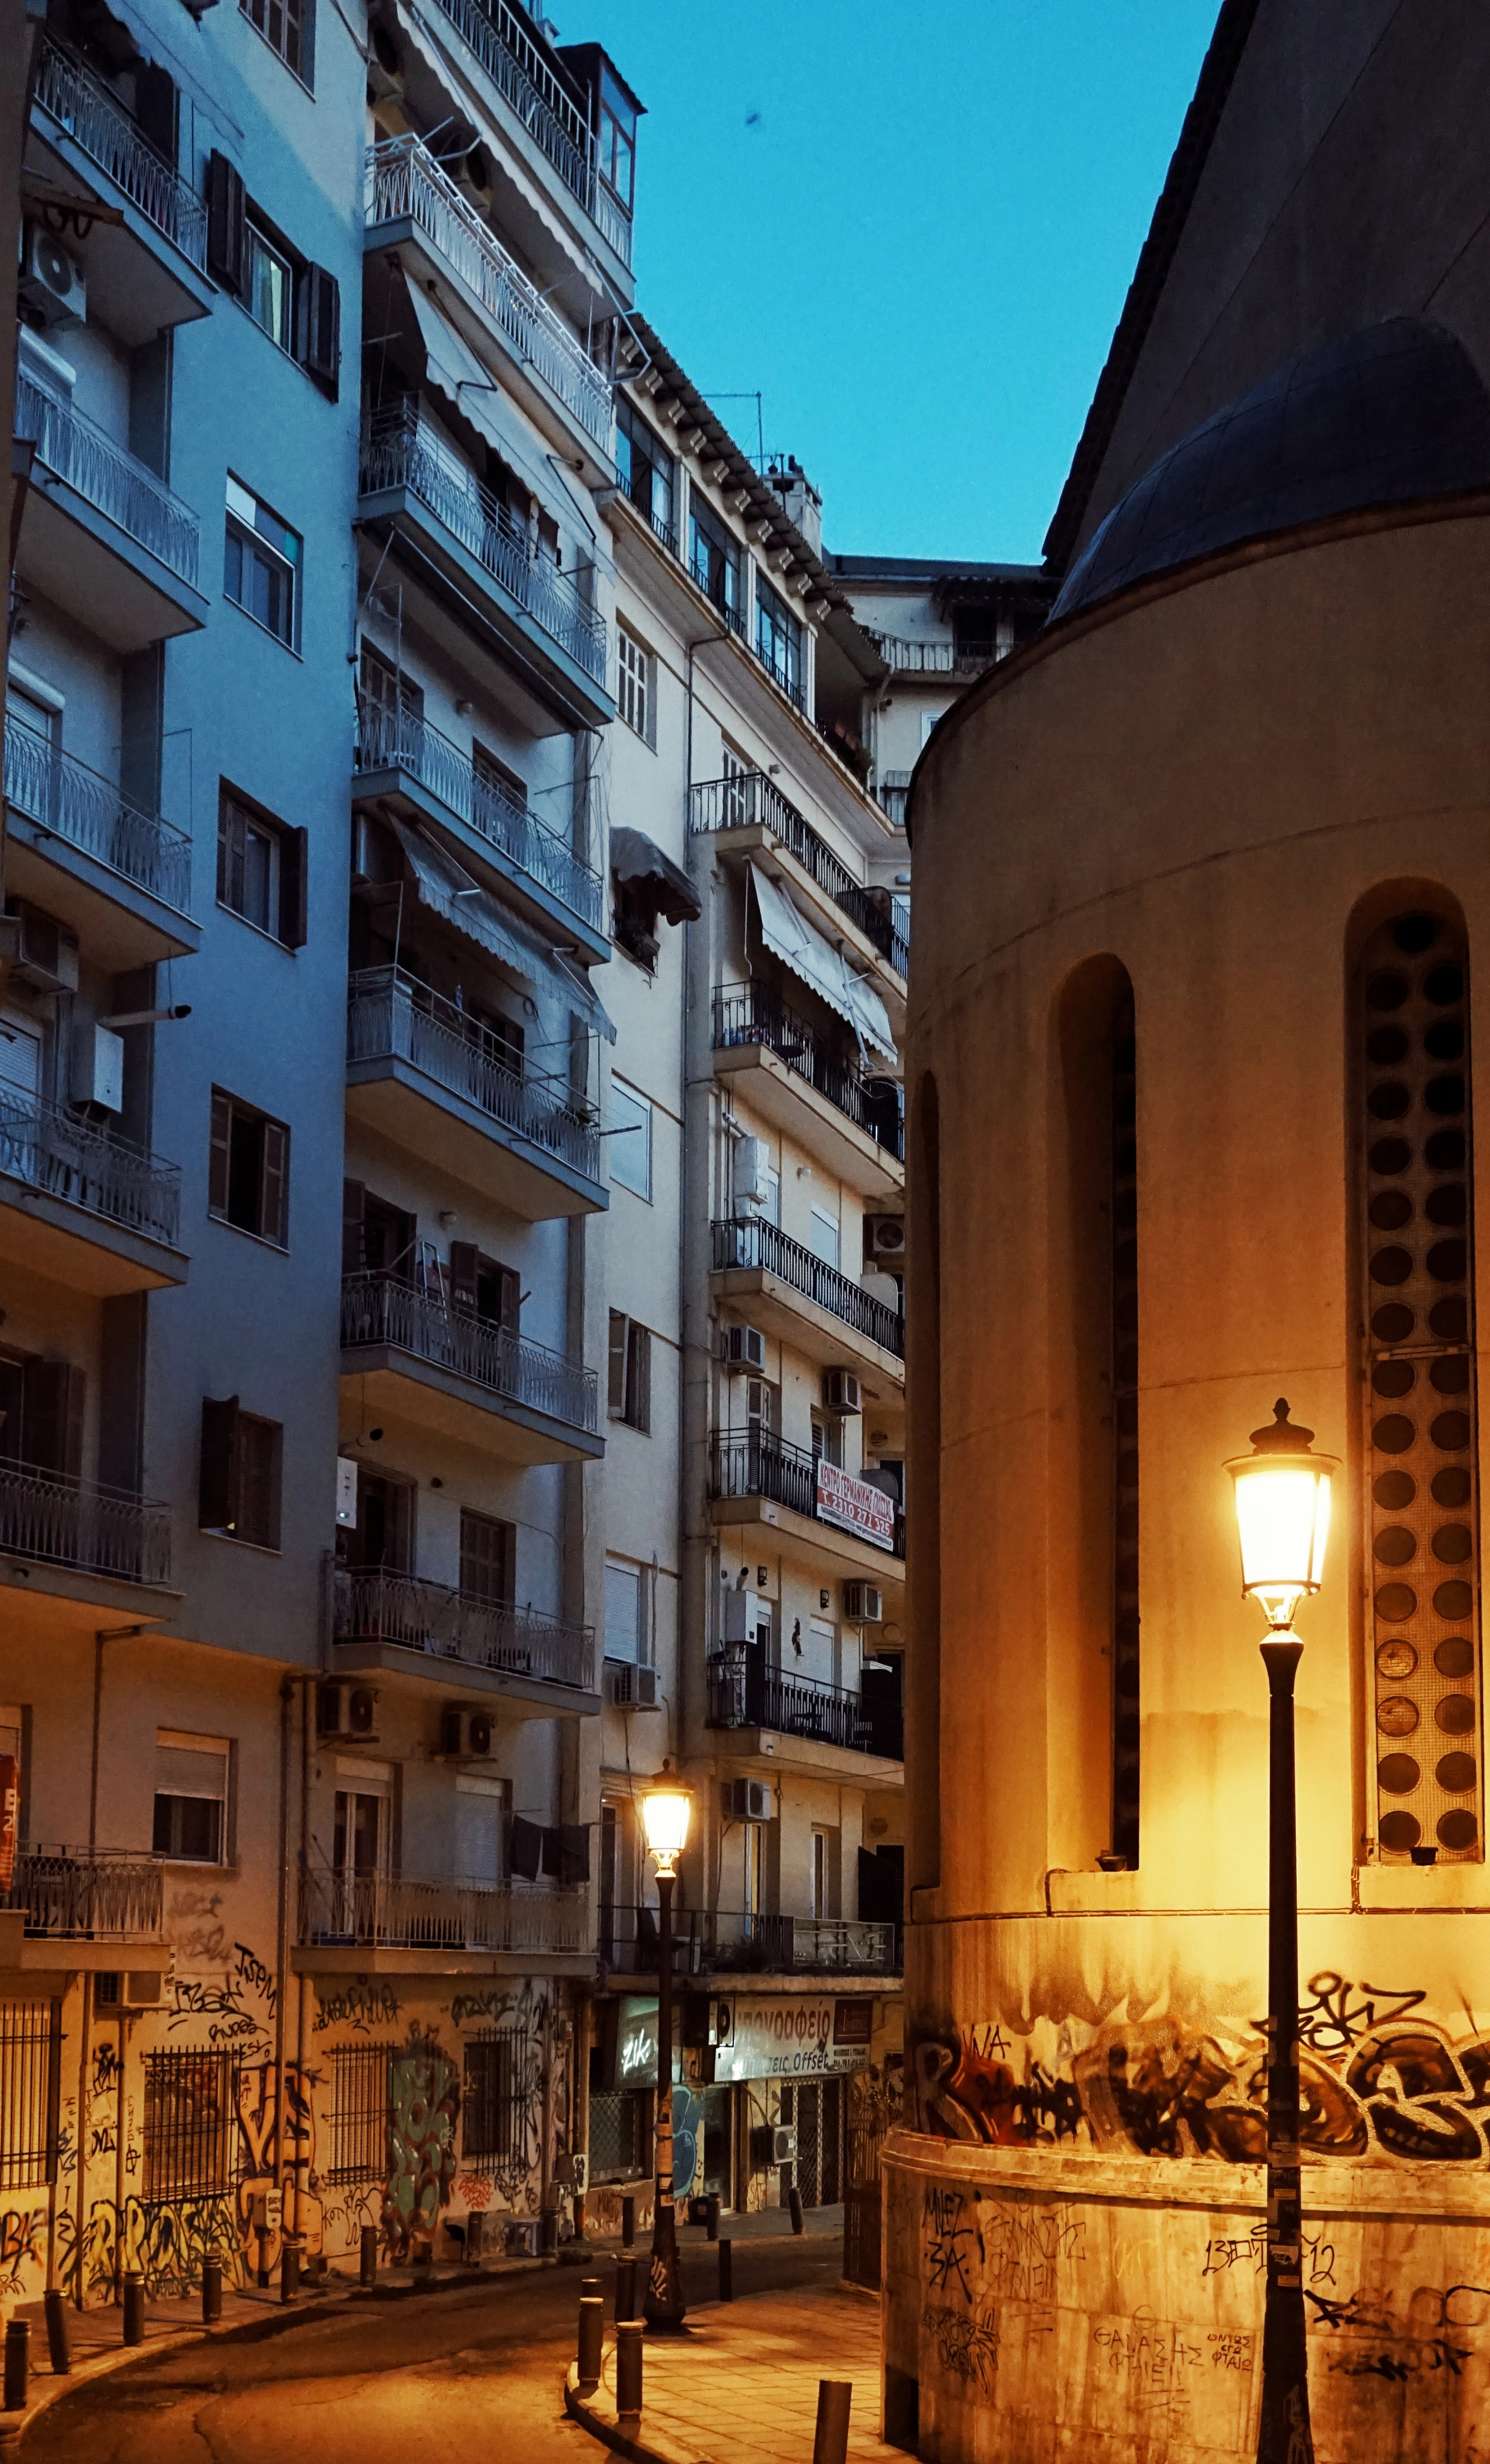 An old church and tall houses build directly next to it at night in Thessaloniki